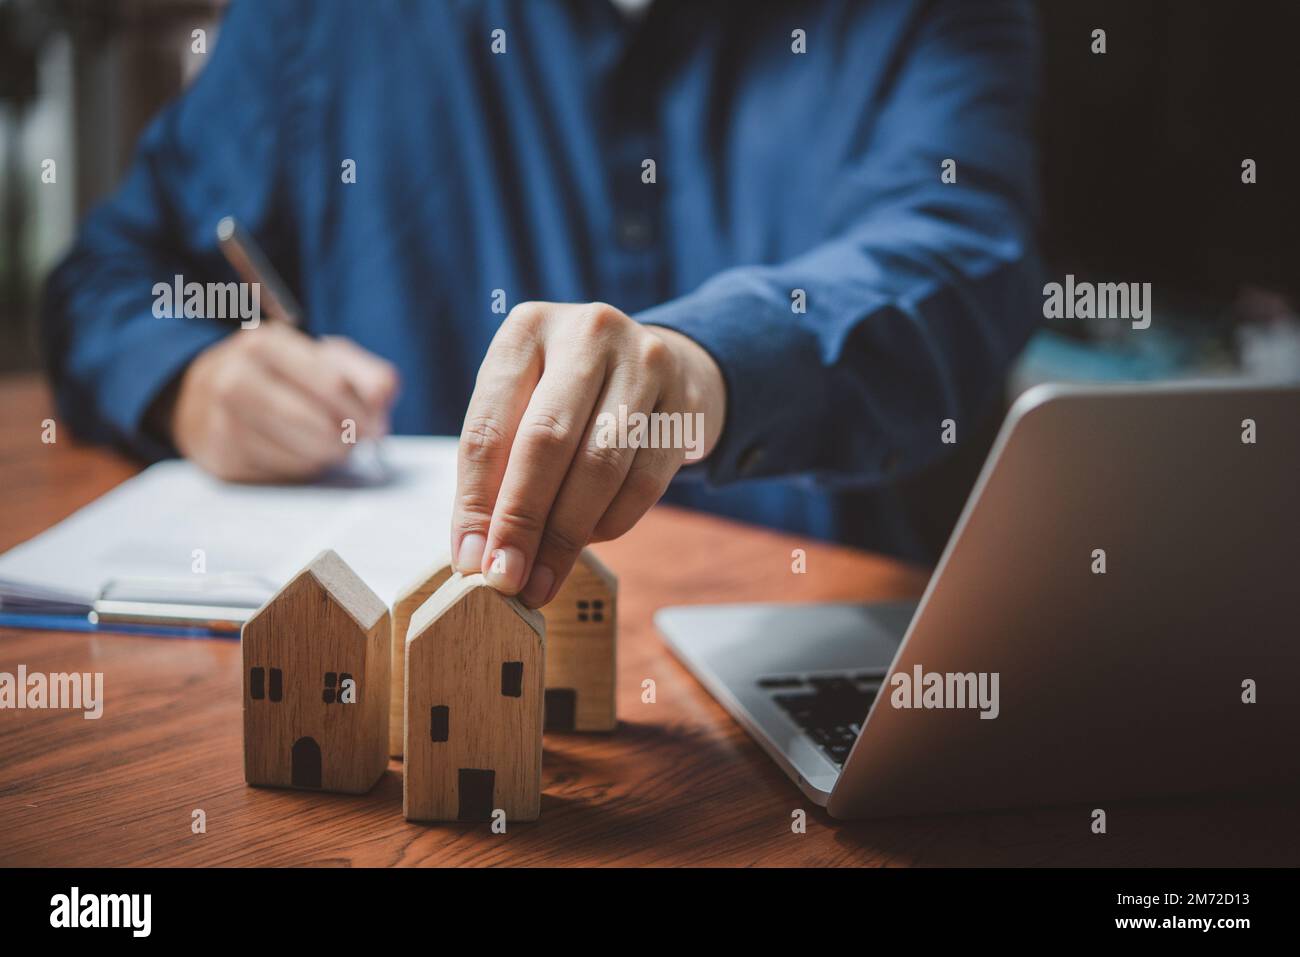 Selling real estate, insurance, buying a house and paying land taxes. Making contracts and legal agreements. Stock Photo